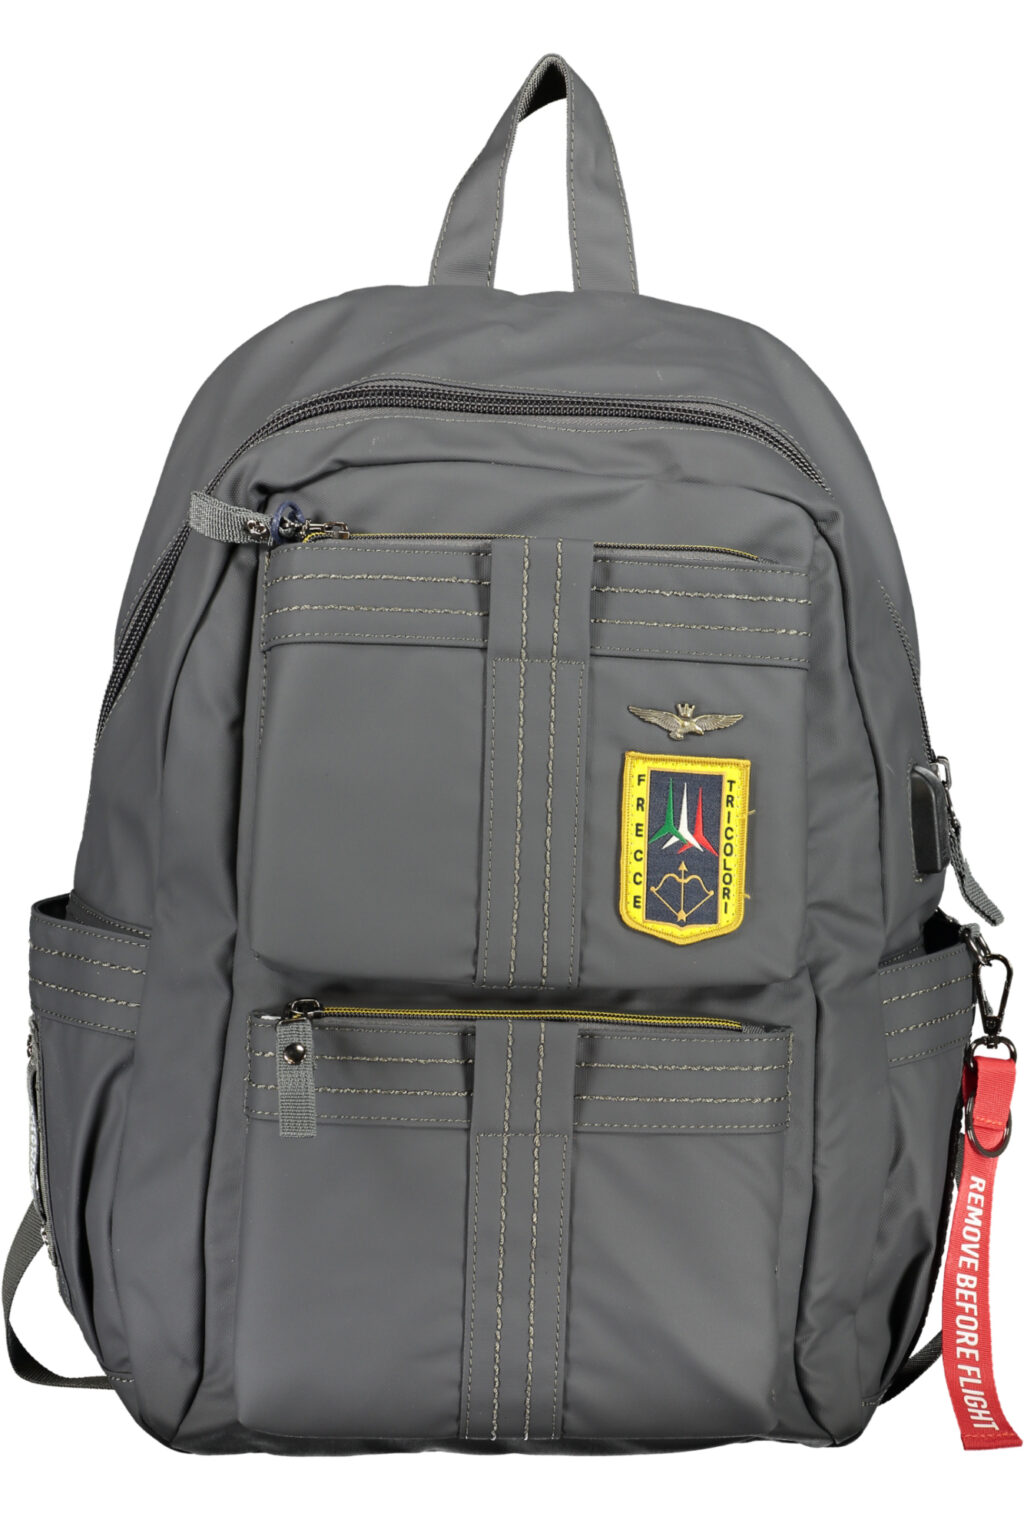 AIR FORCE MEN'S GRAY BACKPACK AM345_GRANTRACIT